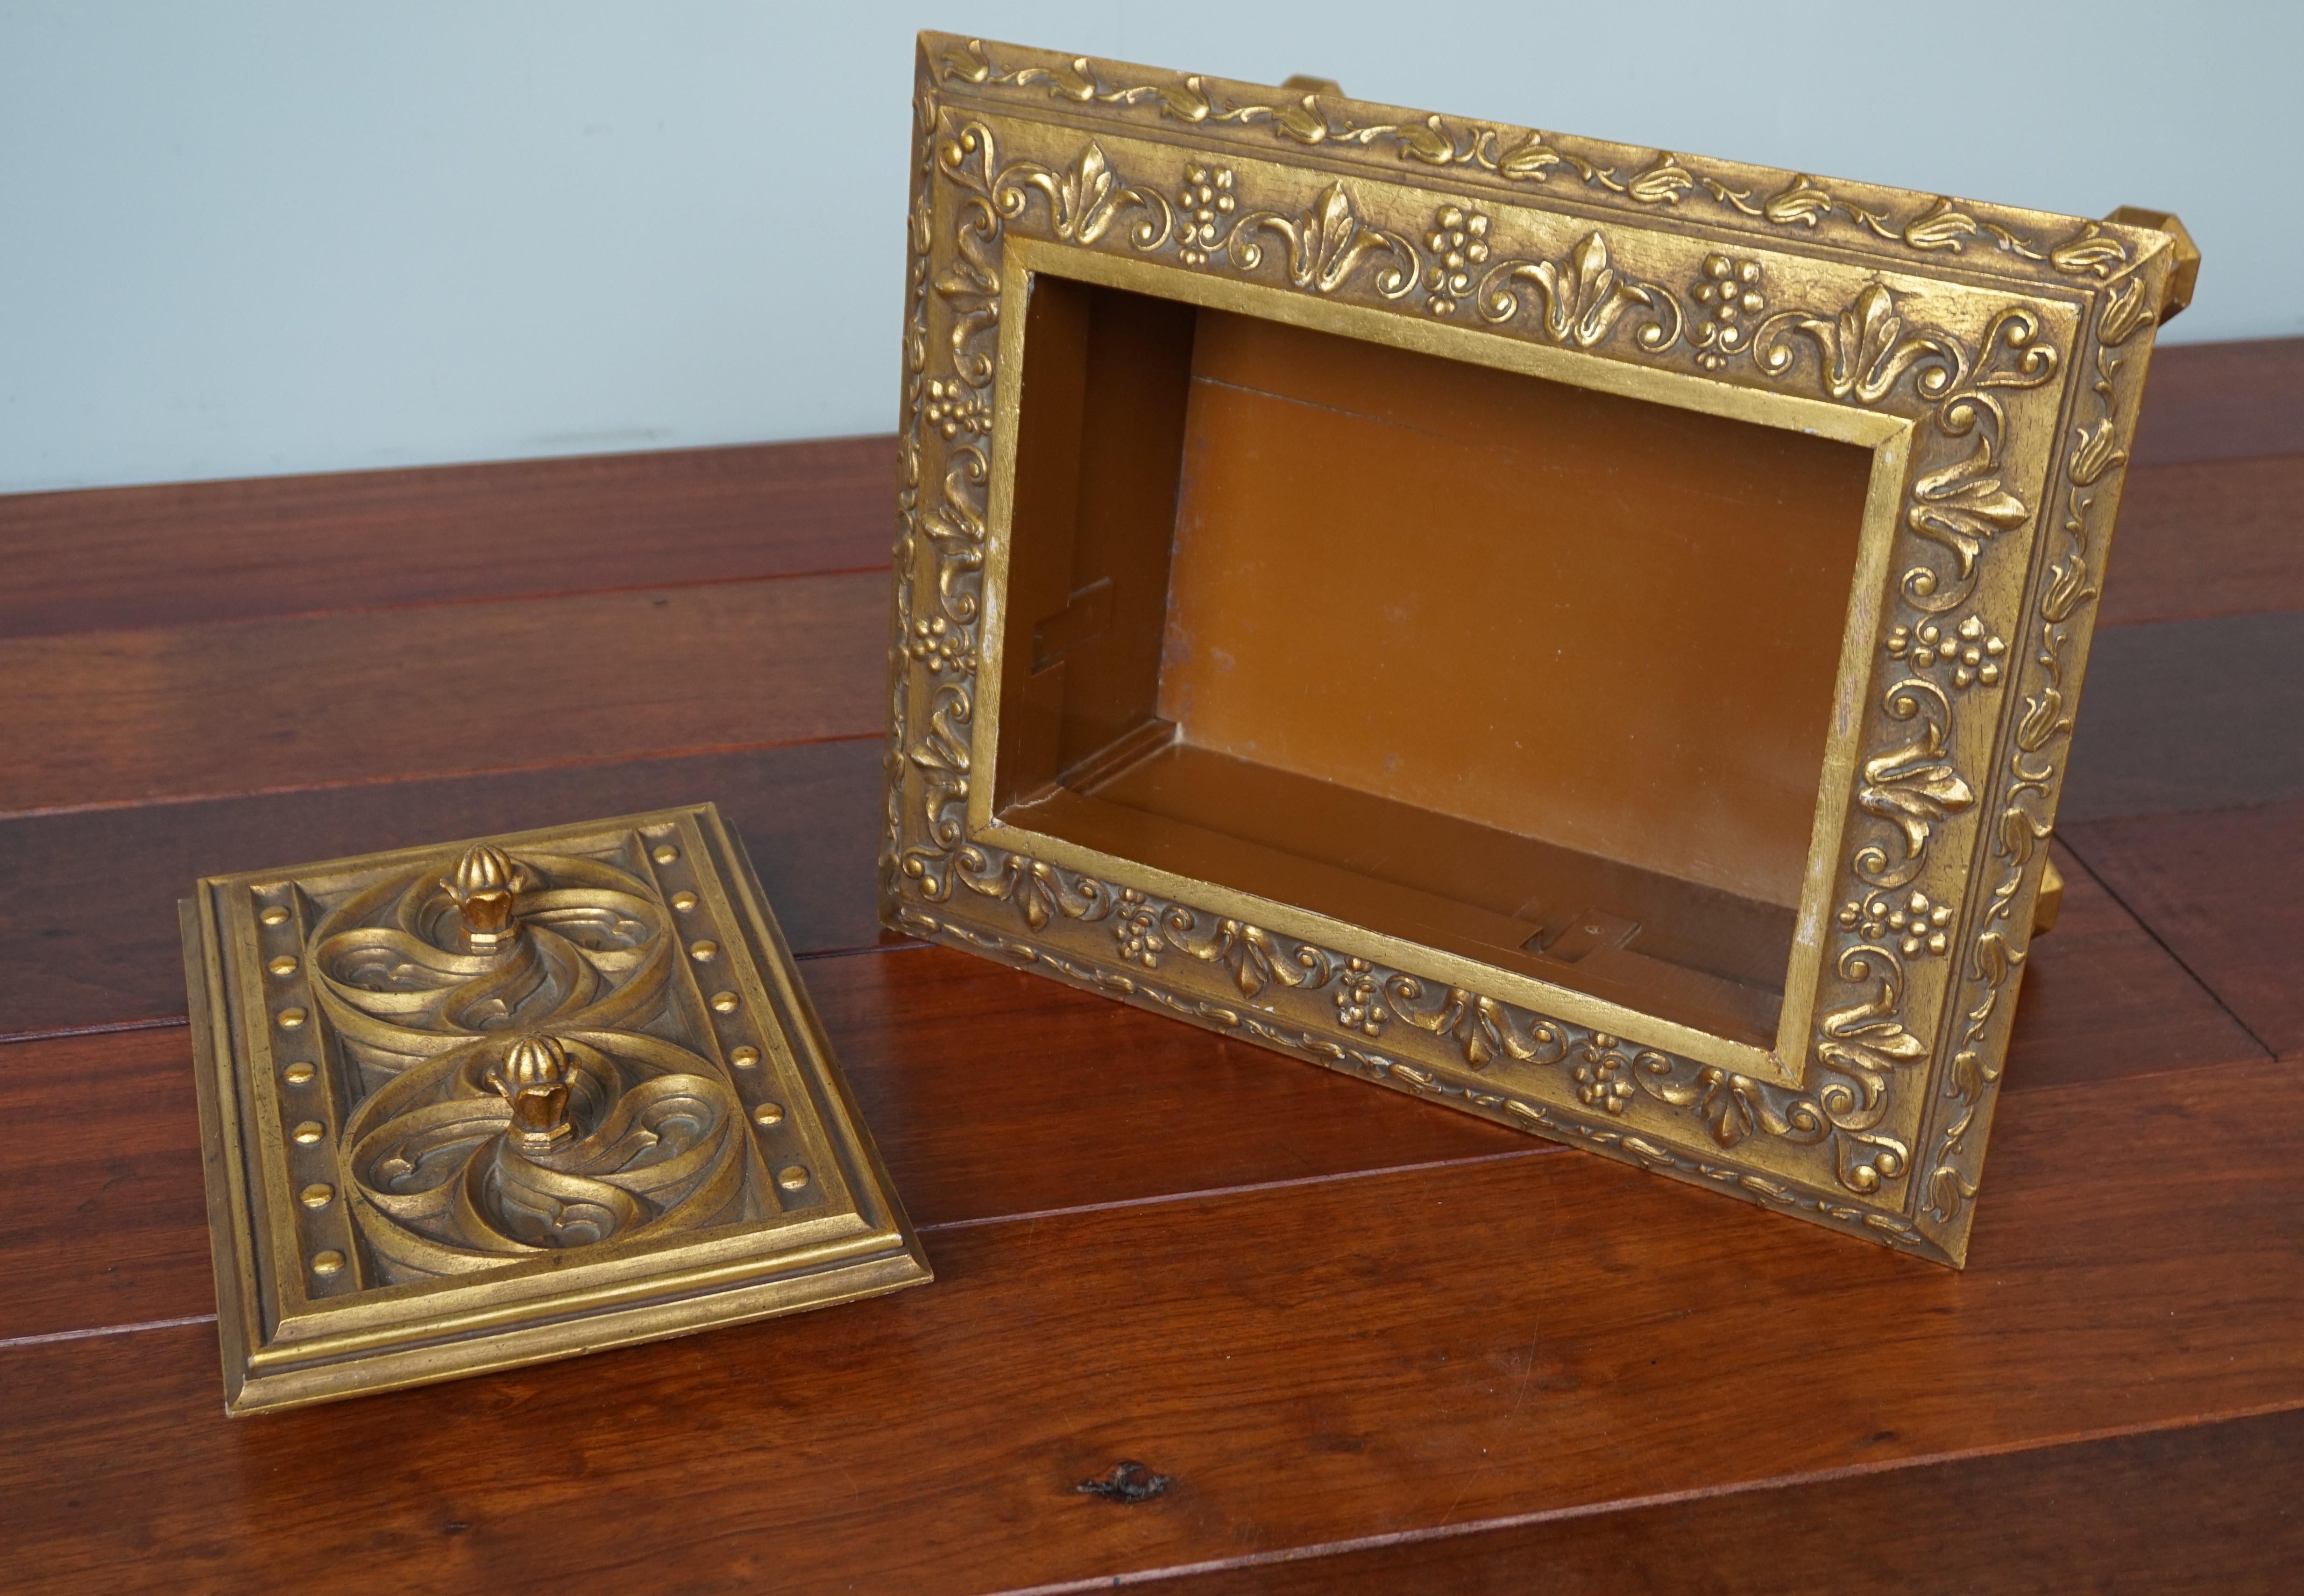 Hand-Carved Unique Hand Carved and Gilt Oak Gothic Revival Church Reliquary Casket with Lid